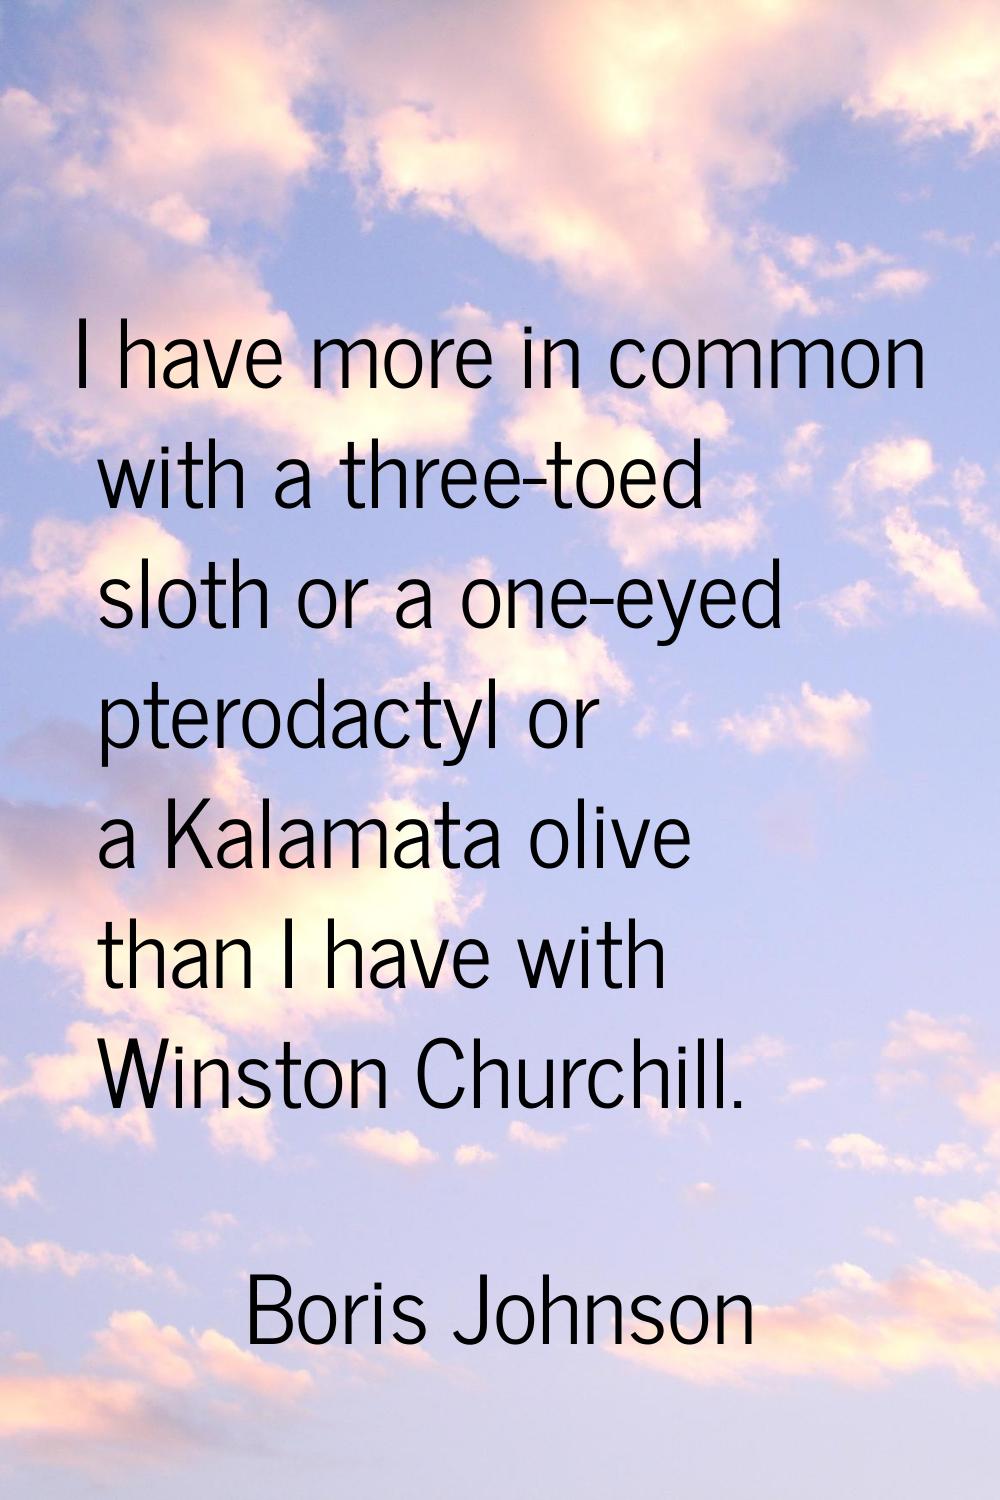 I have more in common with a three-toed sloth or a one-eyed pterodactyl or a Kalamata olive than I 